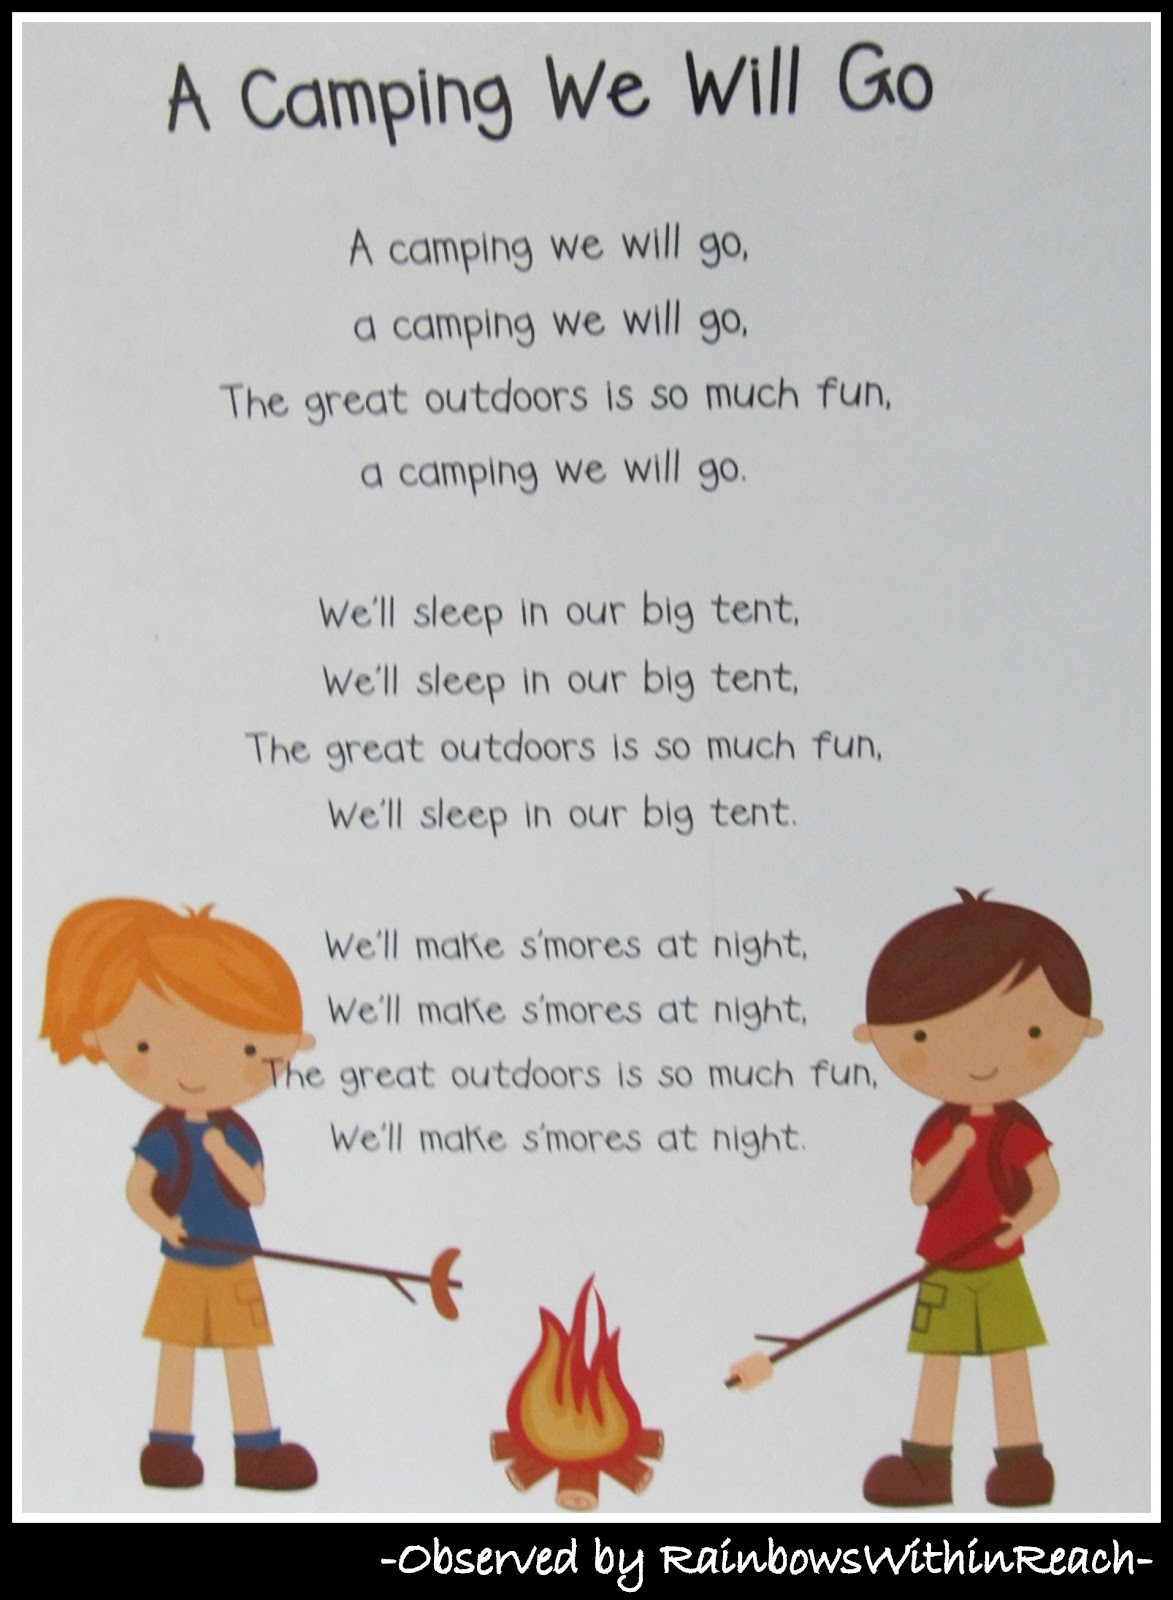 Camping Crafts For Preschoolers
 "Camping" Campout at Preschool DrSeussProjects